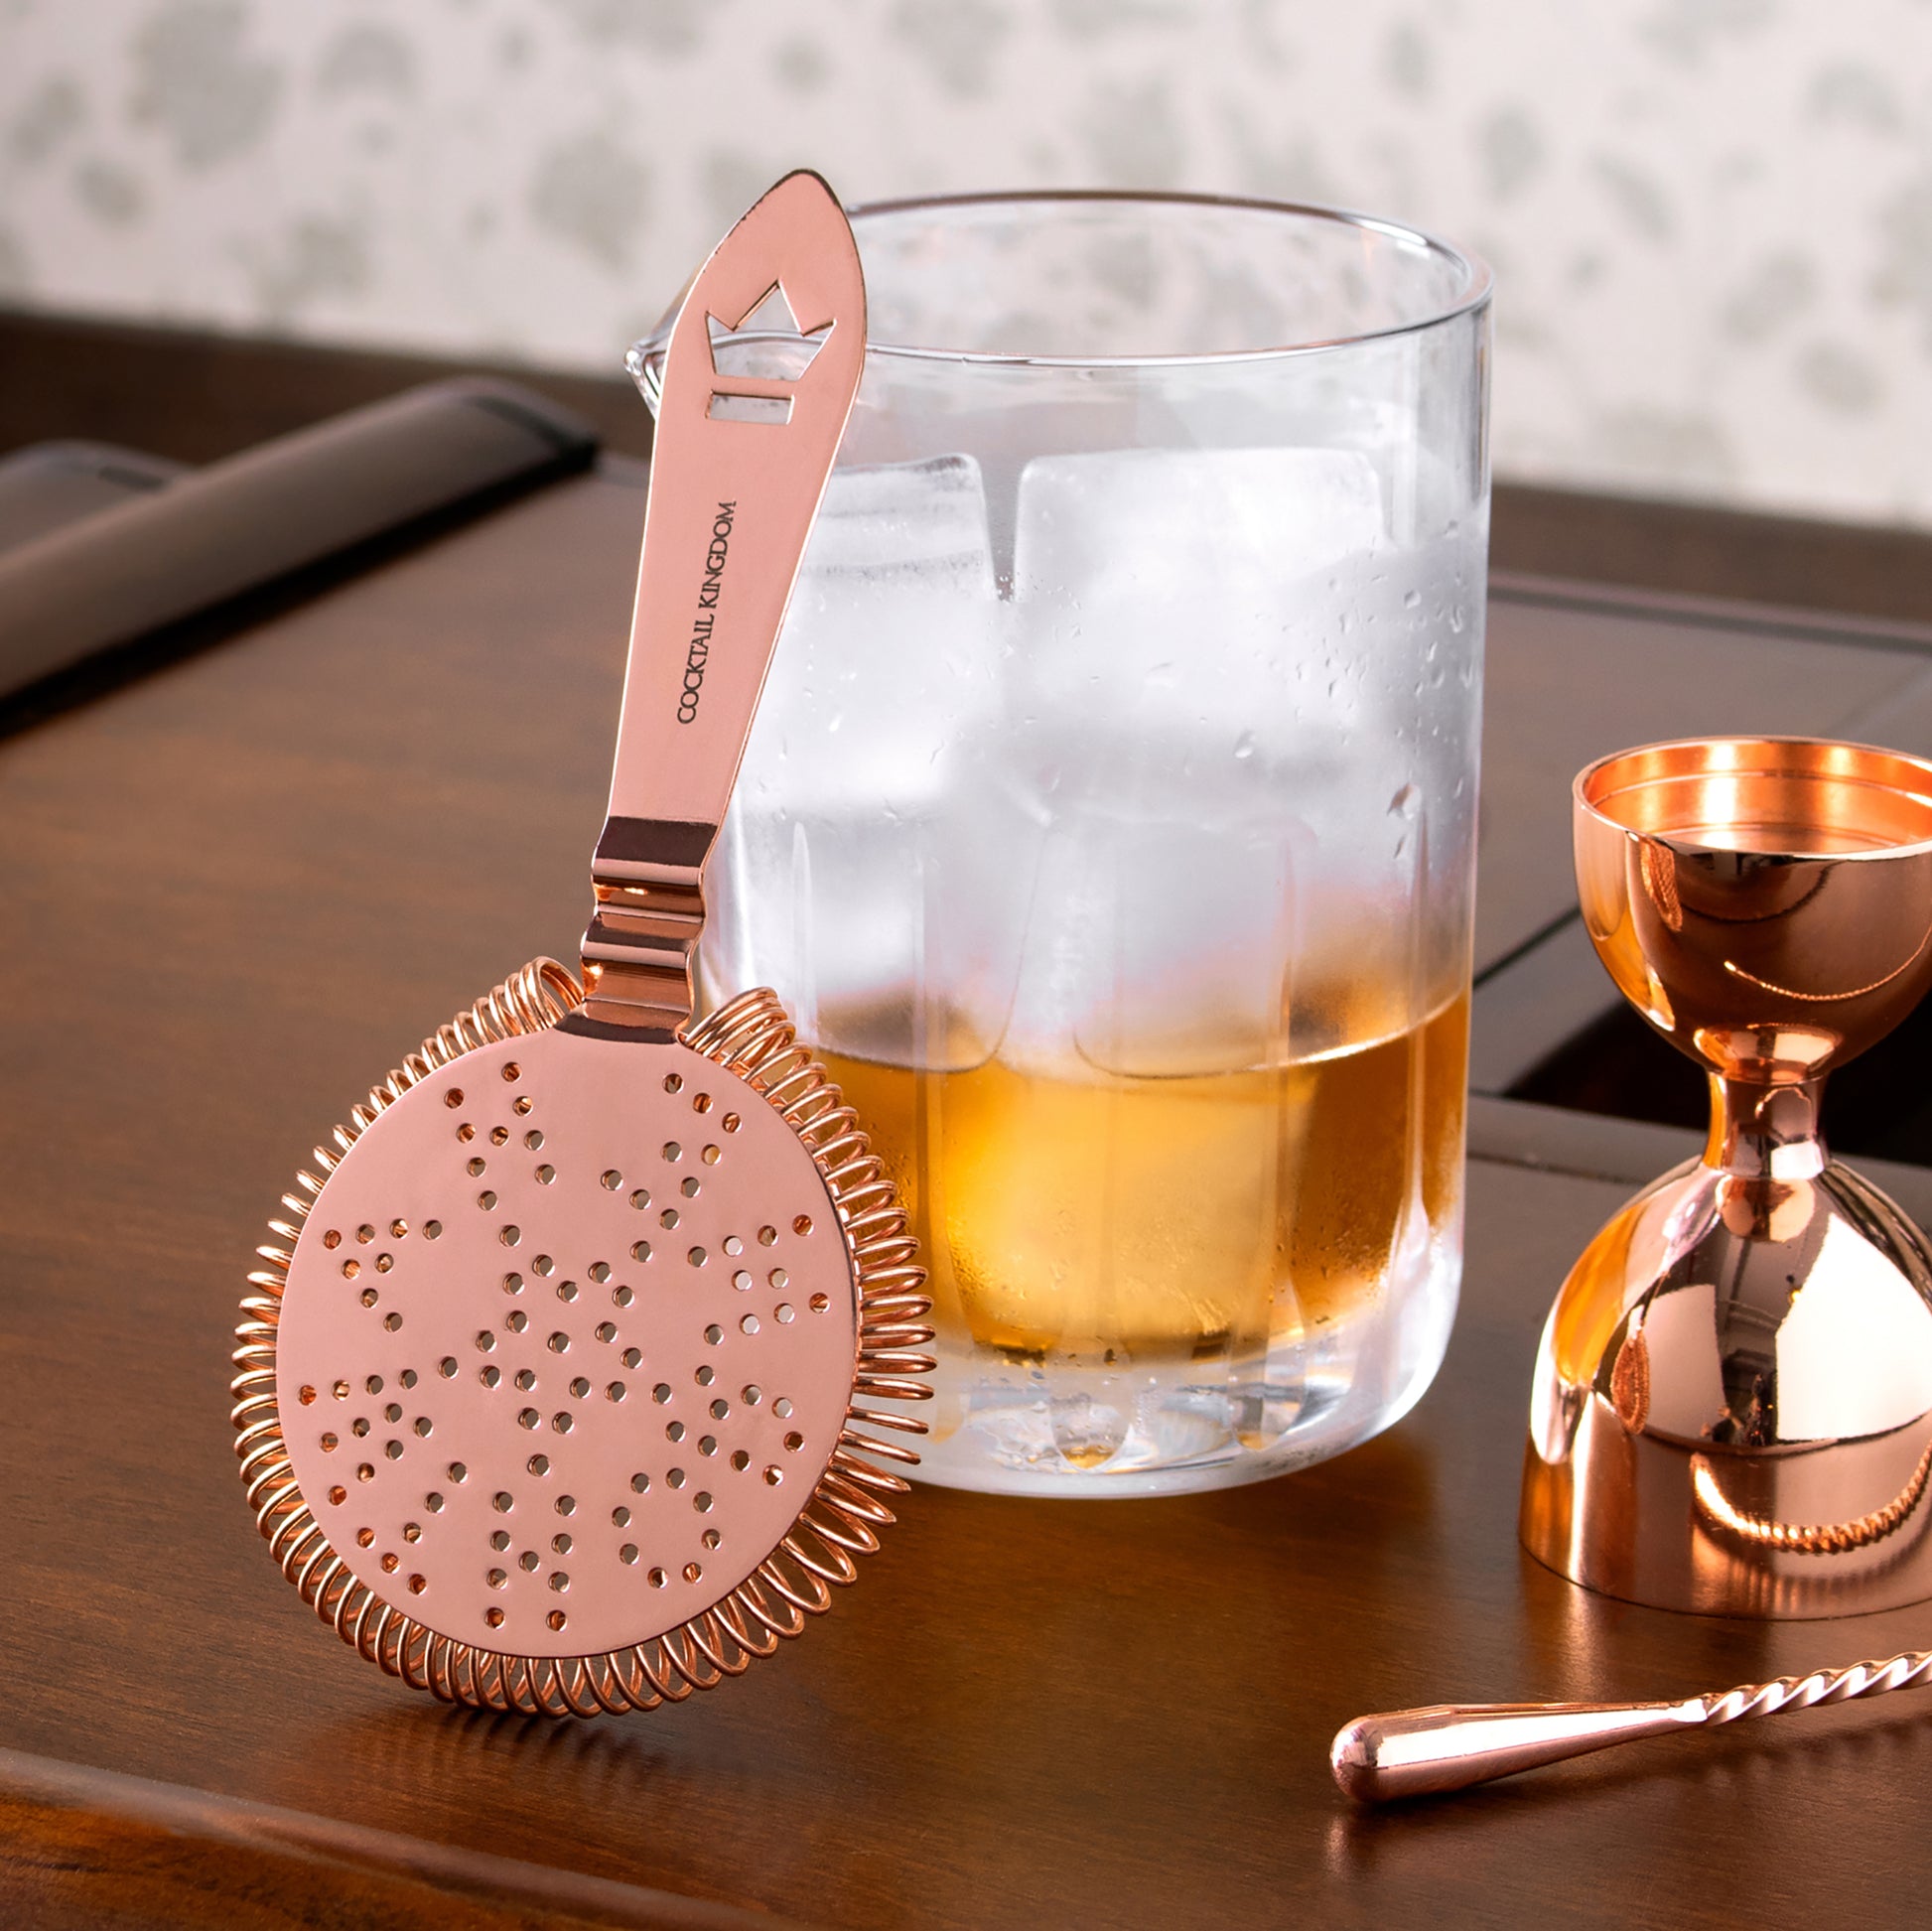 ANTIQUE-STYLE HAWTHORNE STRAINER / COPPER-PLATED